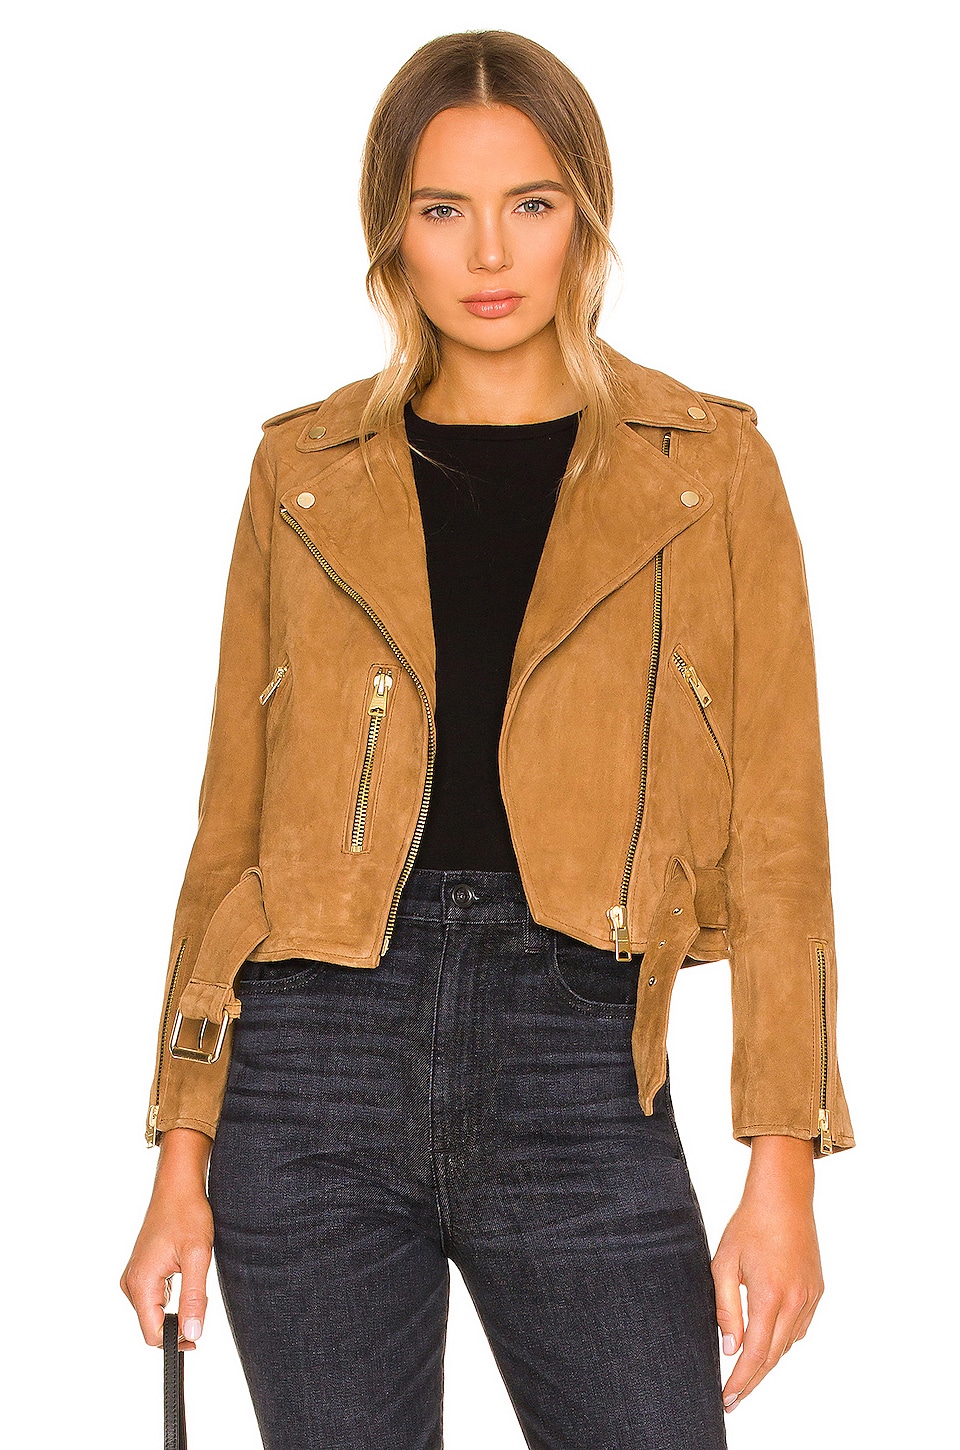 Revolve About Us Suede Tan Moto Jacket - Small Tulsa Mall